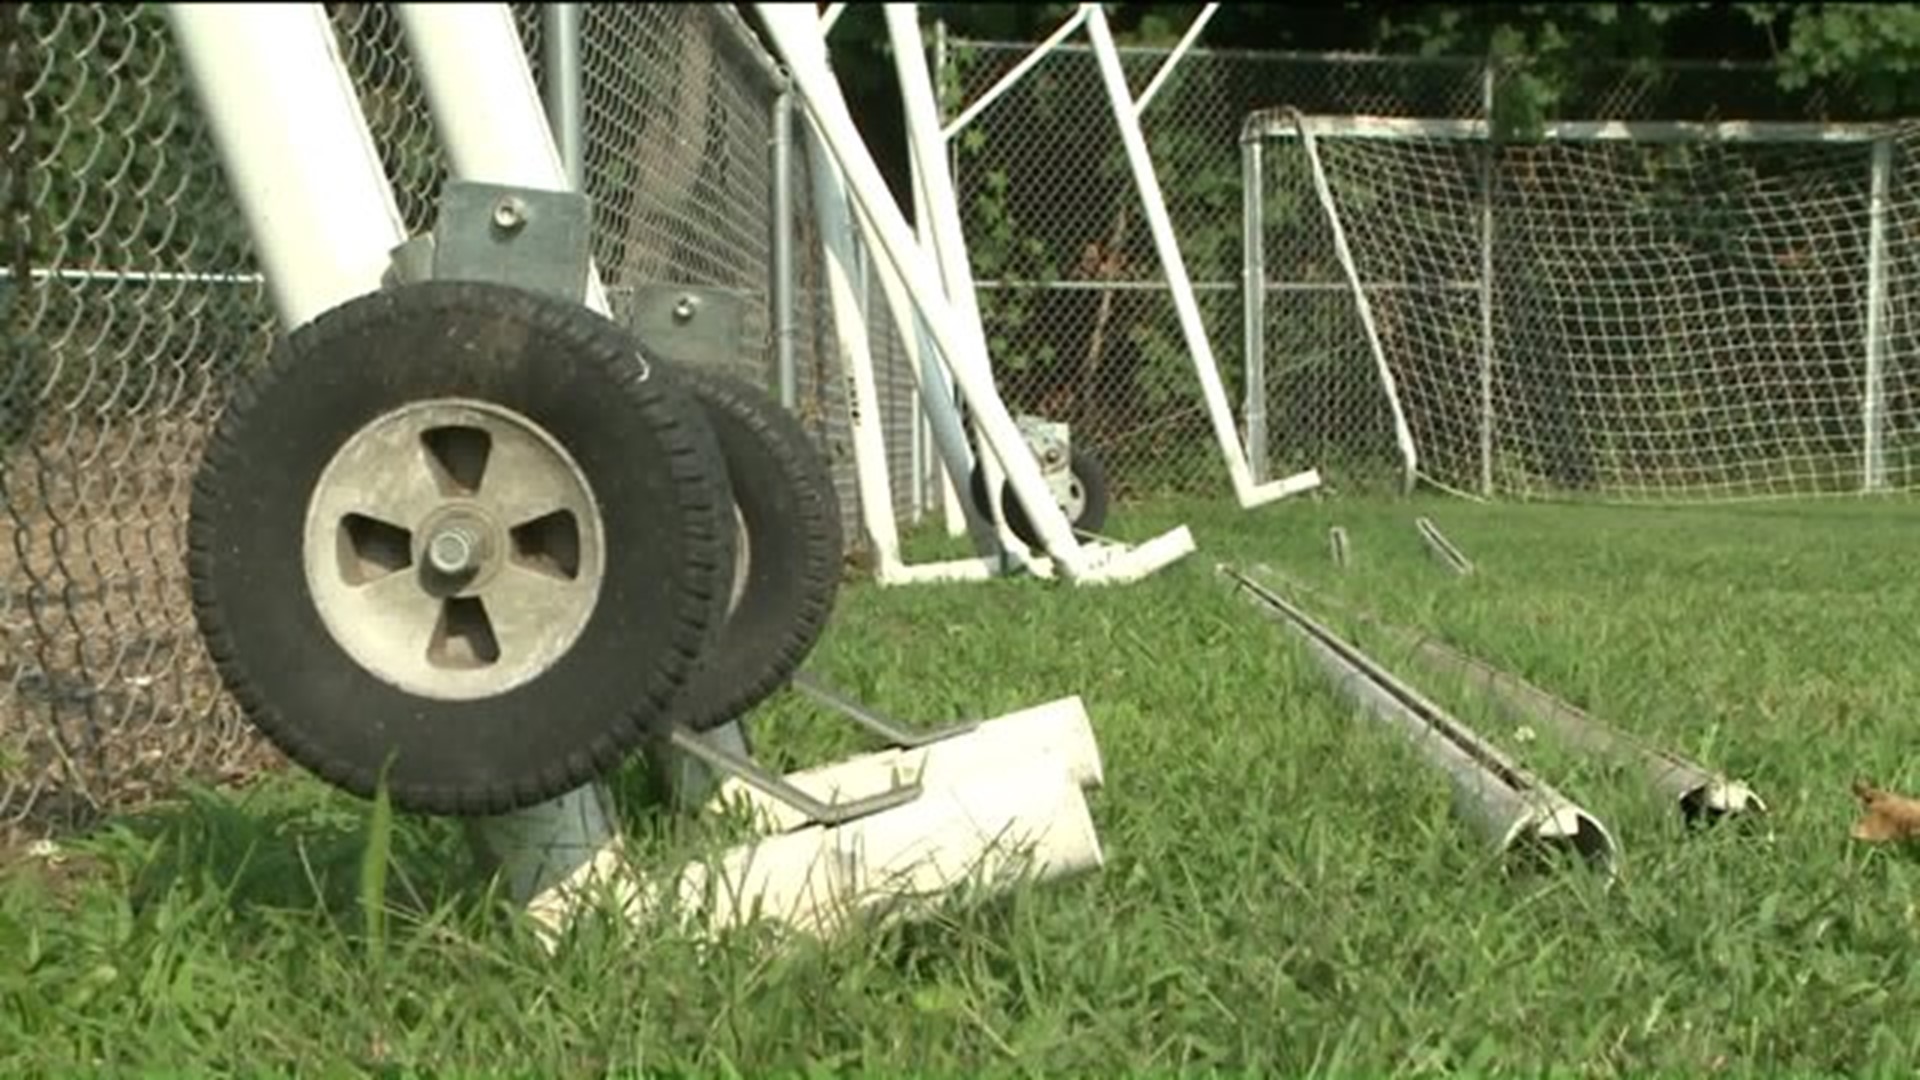 Naugautuck soccer goals vandalized, leaving youth league in trouble as season begins